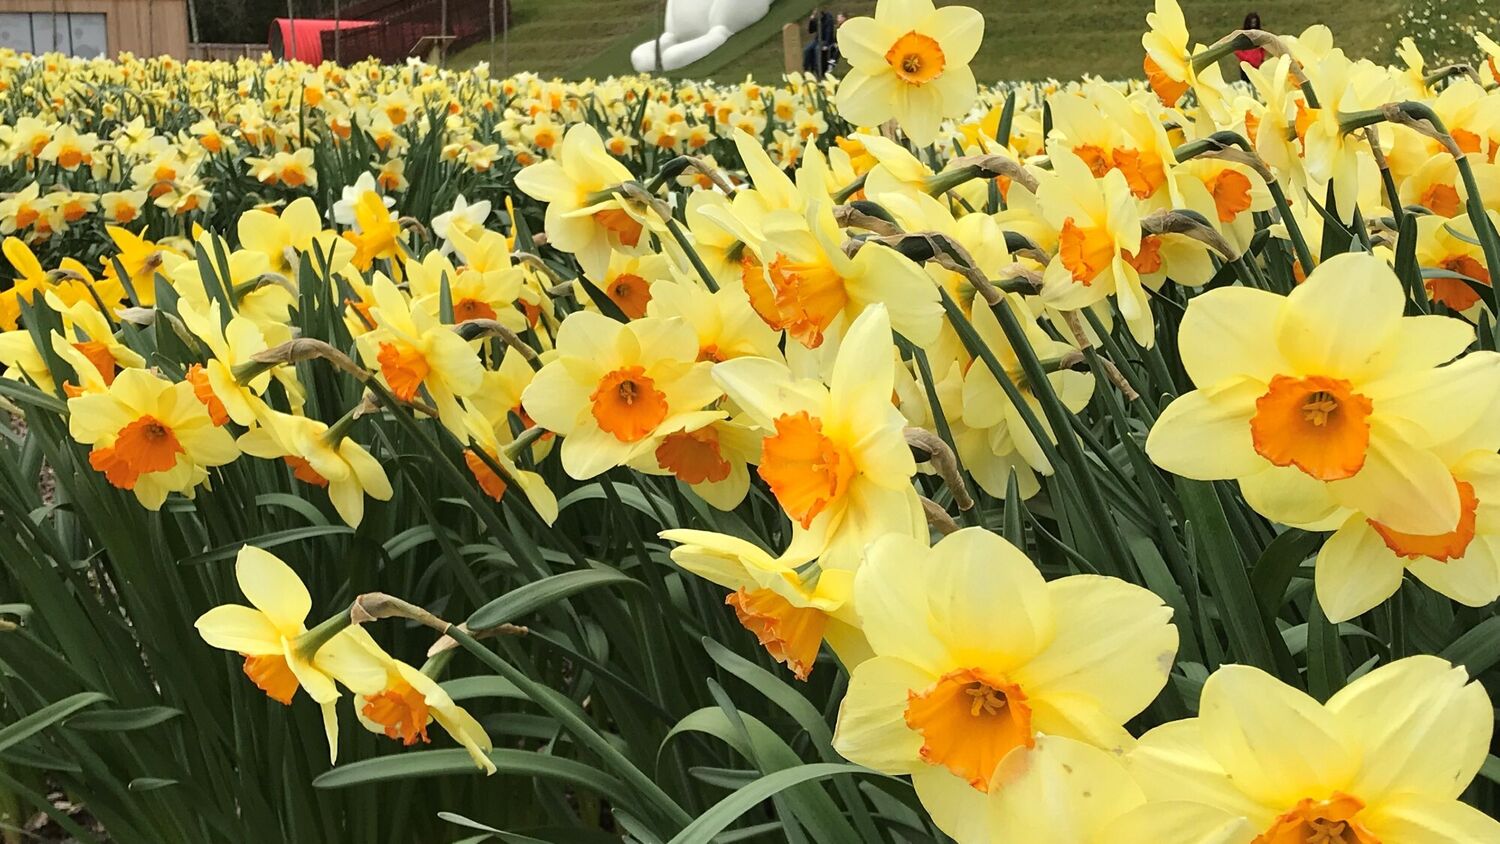 A host of golden daffodils, with deep yellow trumpets, grow beside a grassy bank at Brodie Castle. In the distance a large white bunny model can be seen lying on the bank.